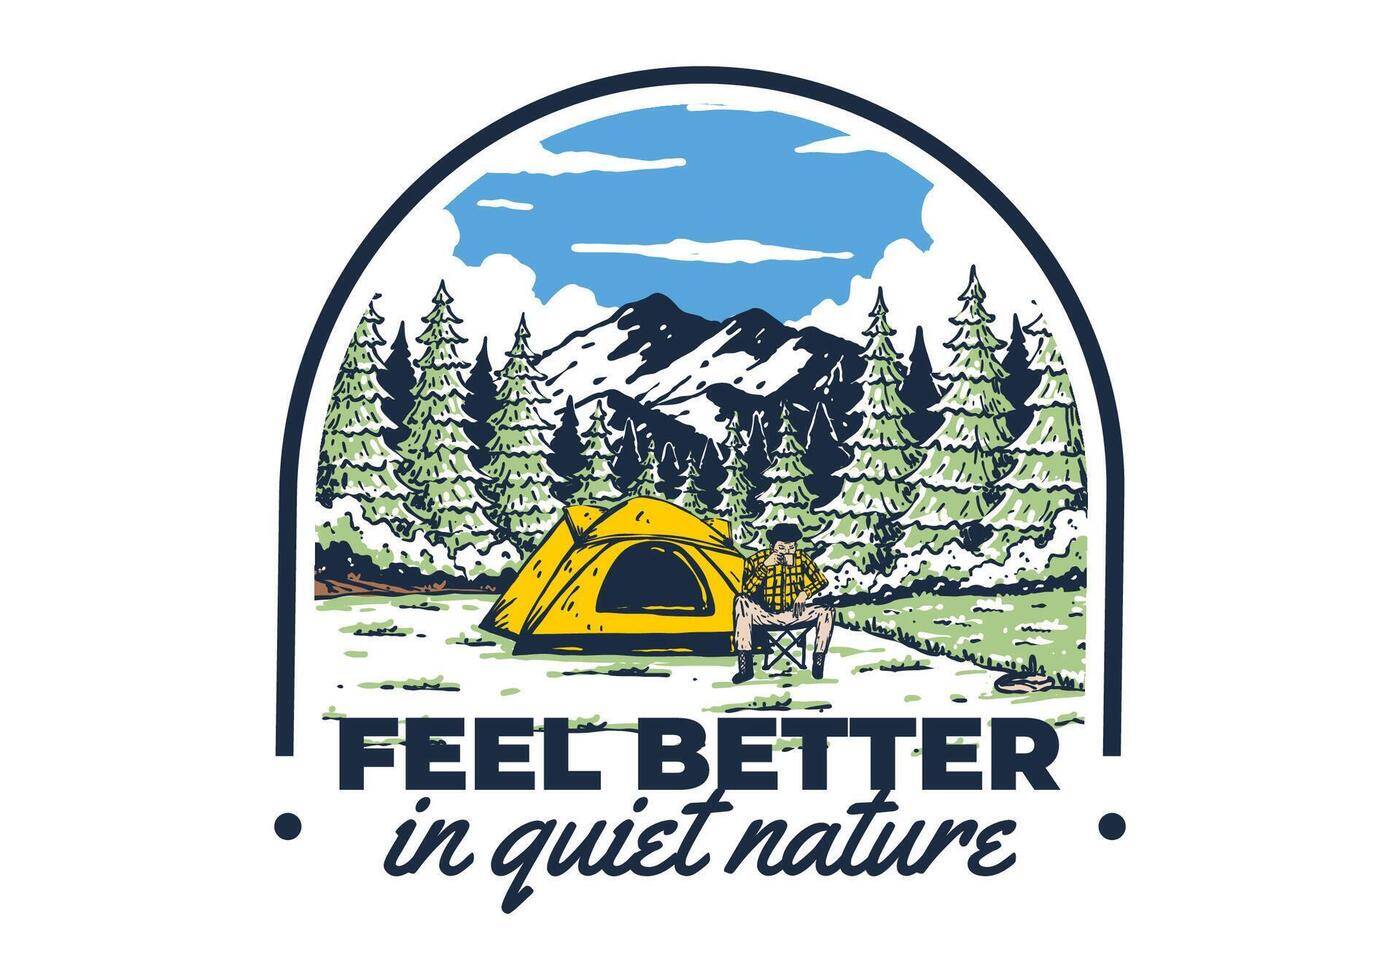 Camping in nature. Vintage outdoor illustration design vector